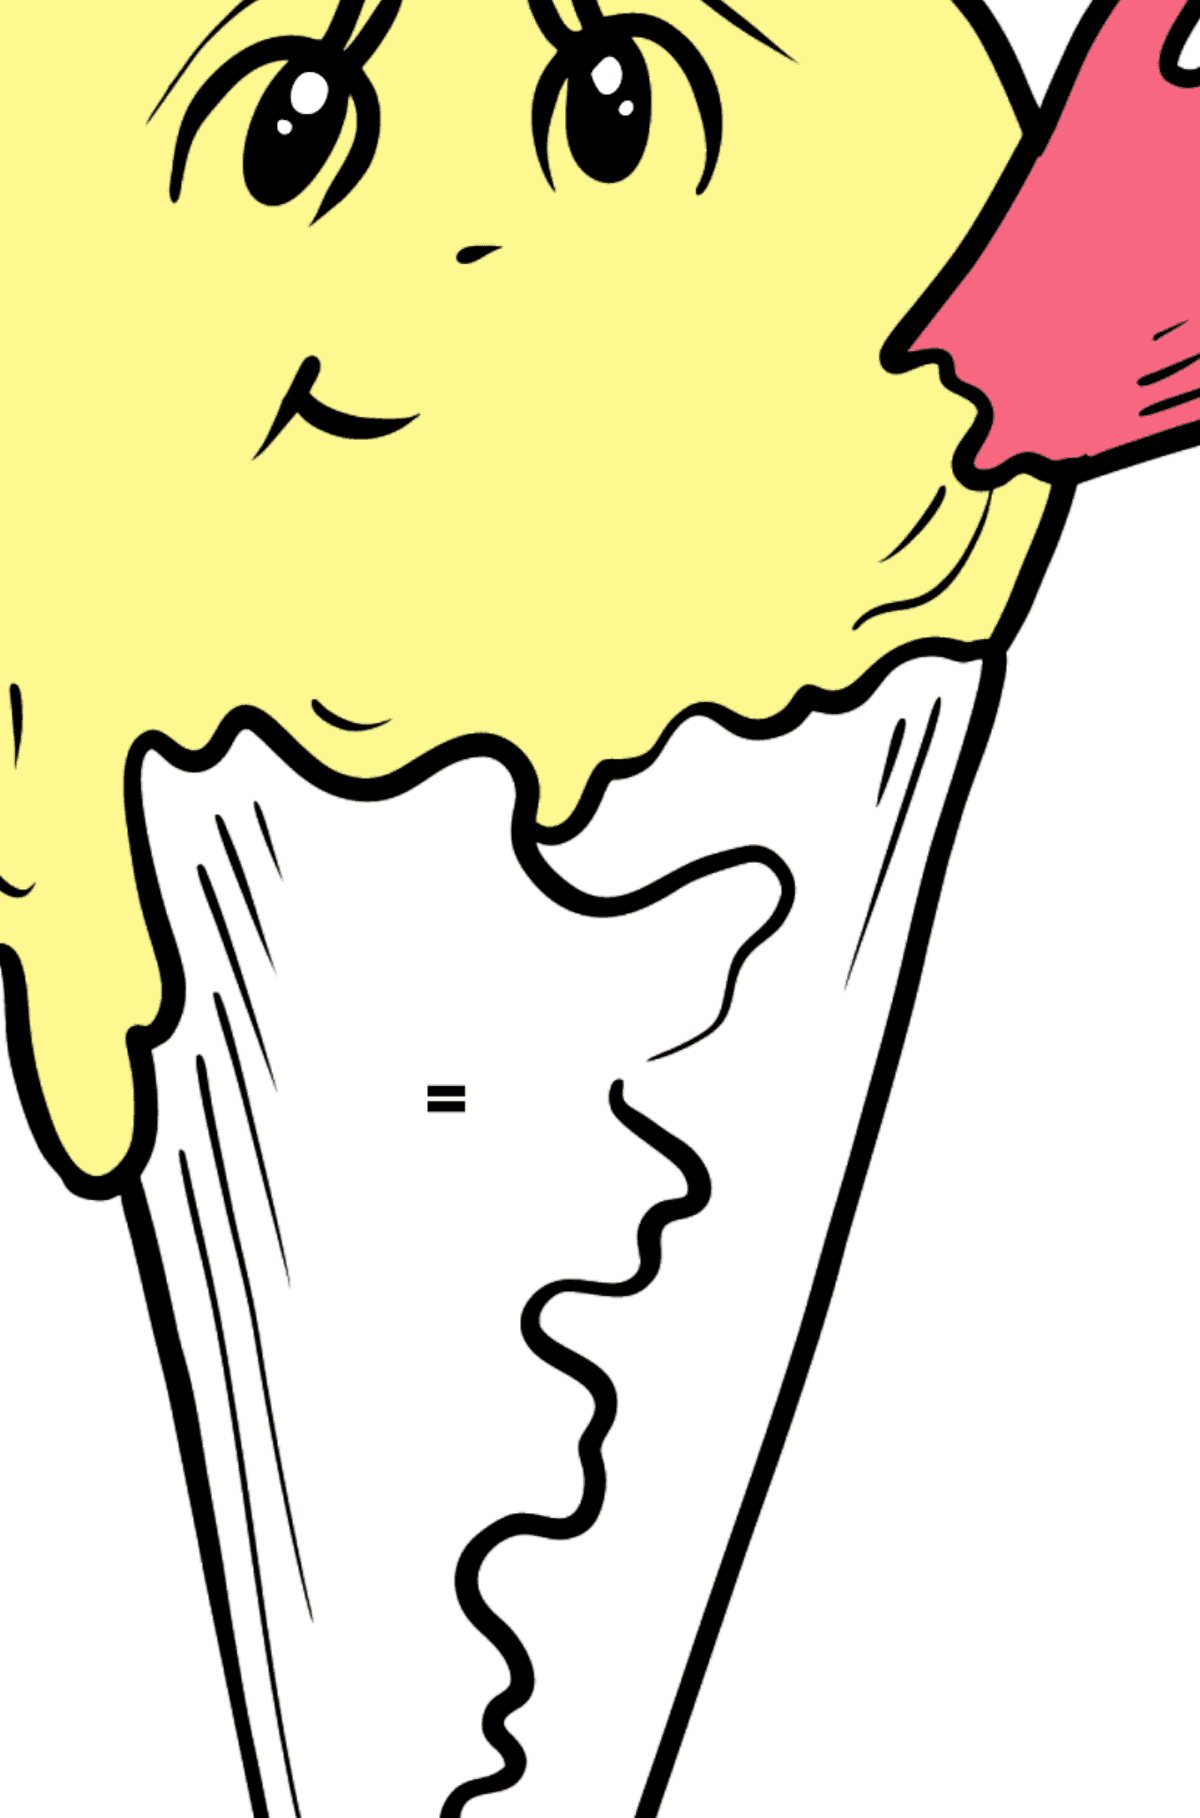 Banana Ice Cream with Eyes coloring page - Coloring by Symbols for Kids